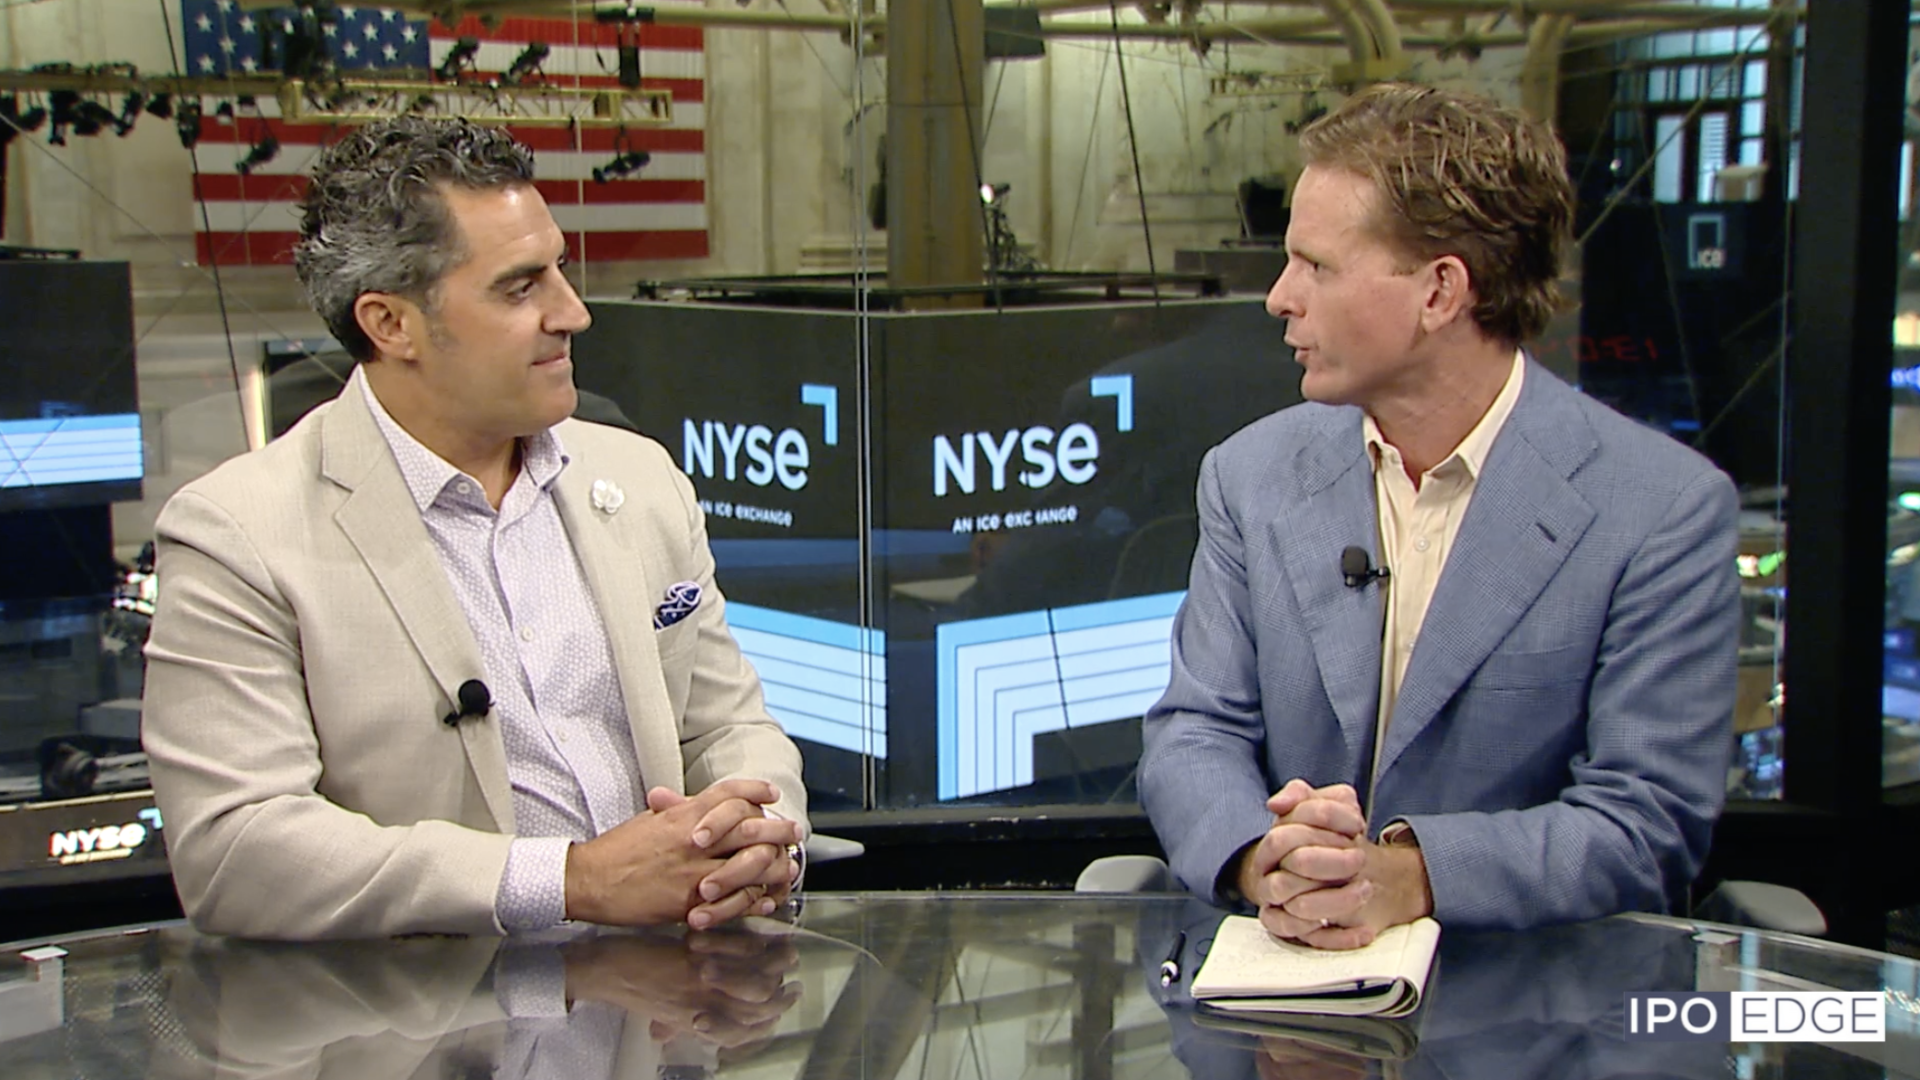 Fireside with Phononic CEO Tony Atti, Live from NYSE